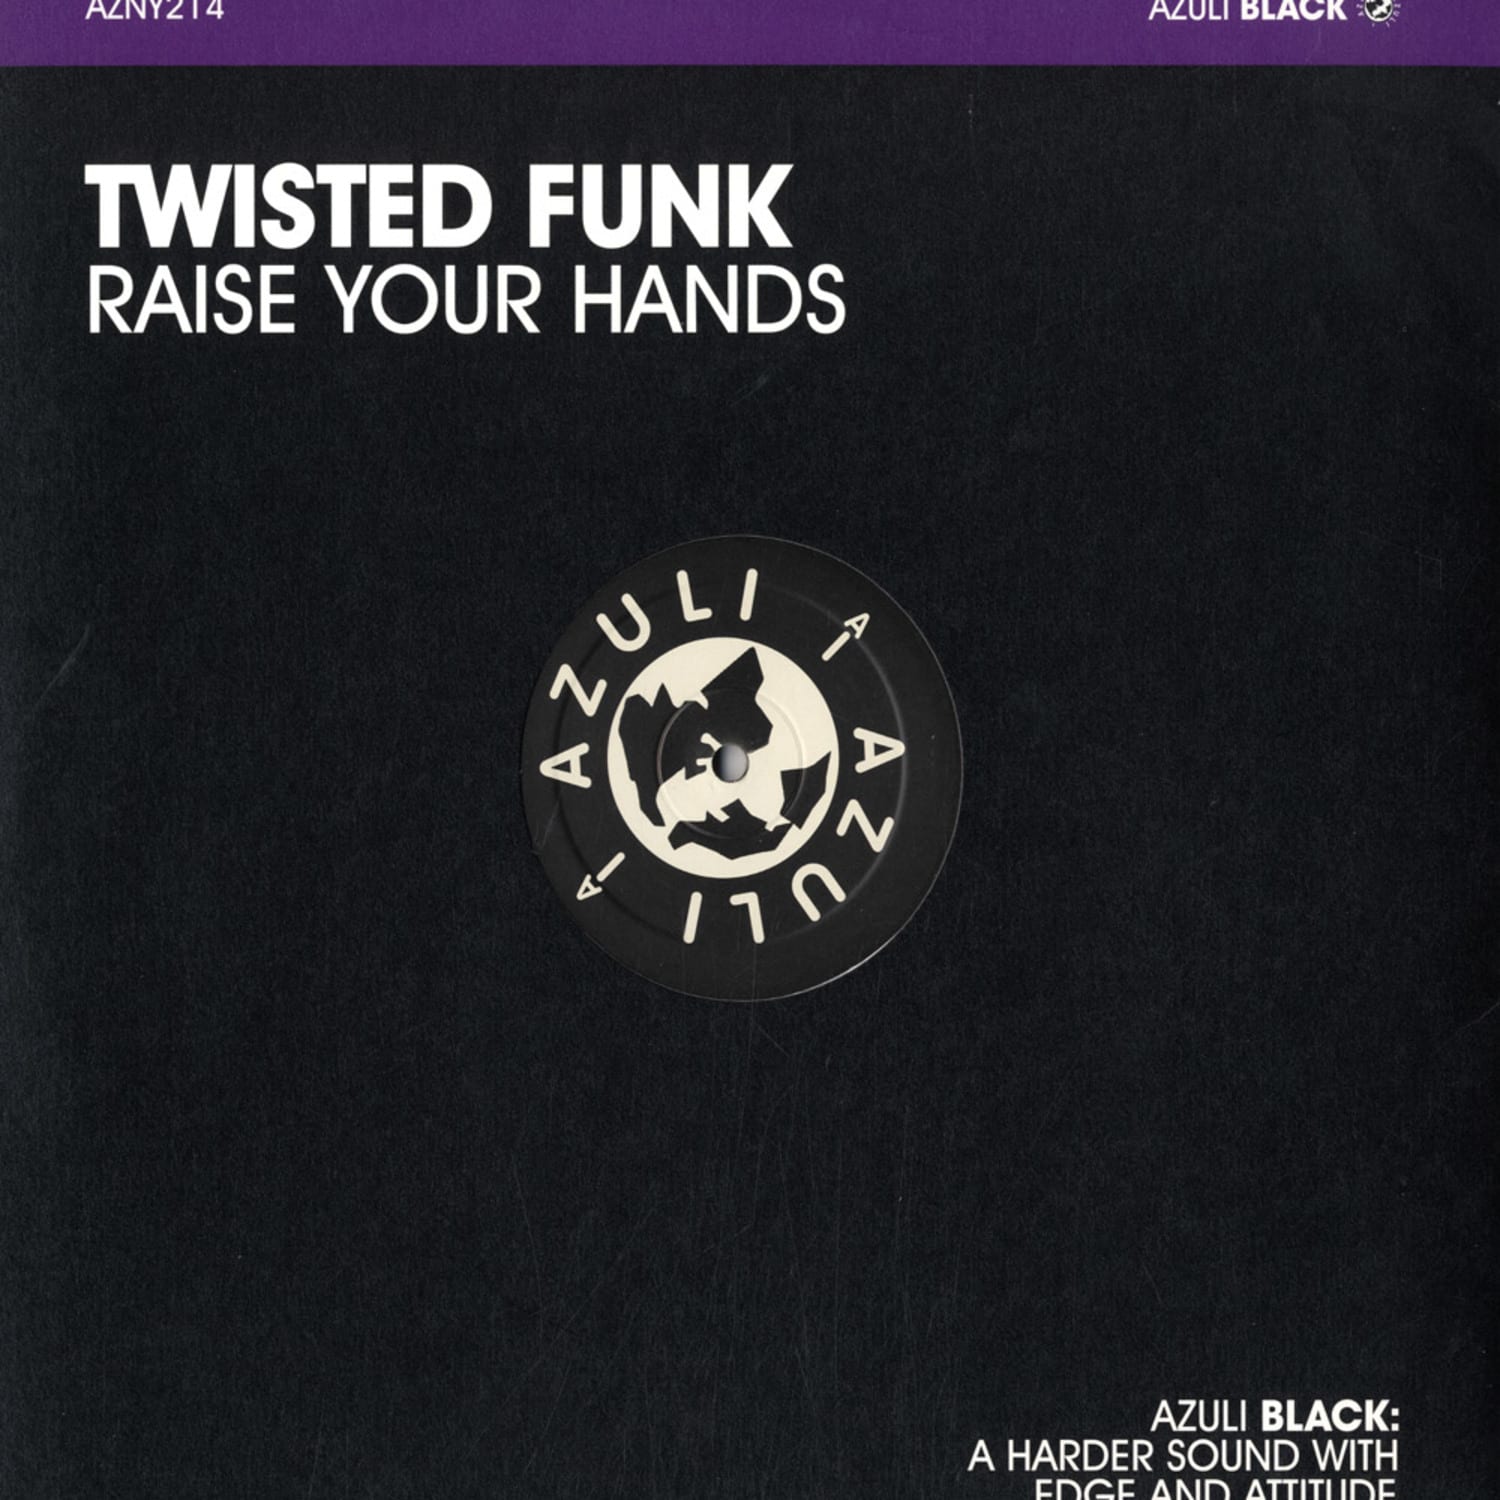 Twisted Funk - RAISE YOUR HANDS